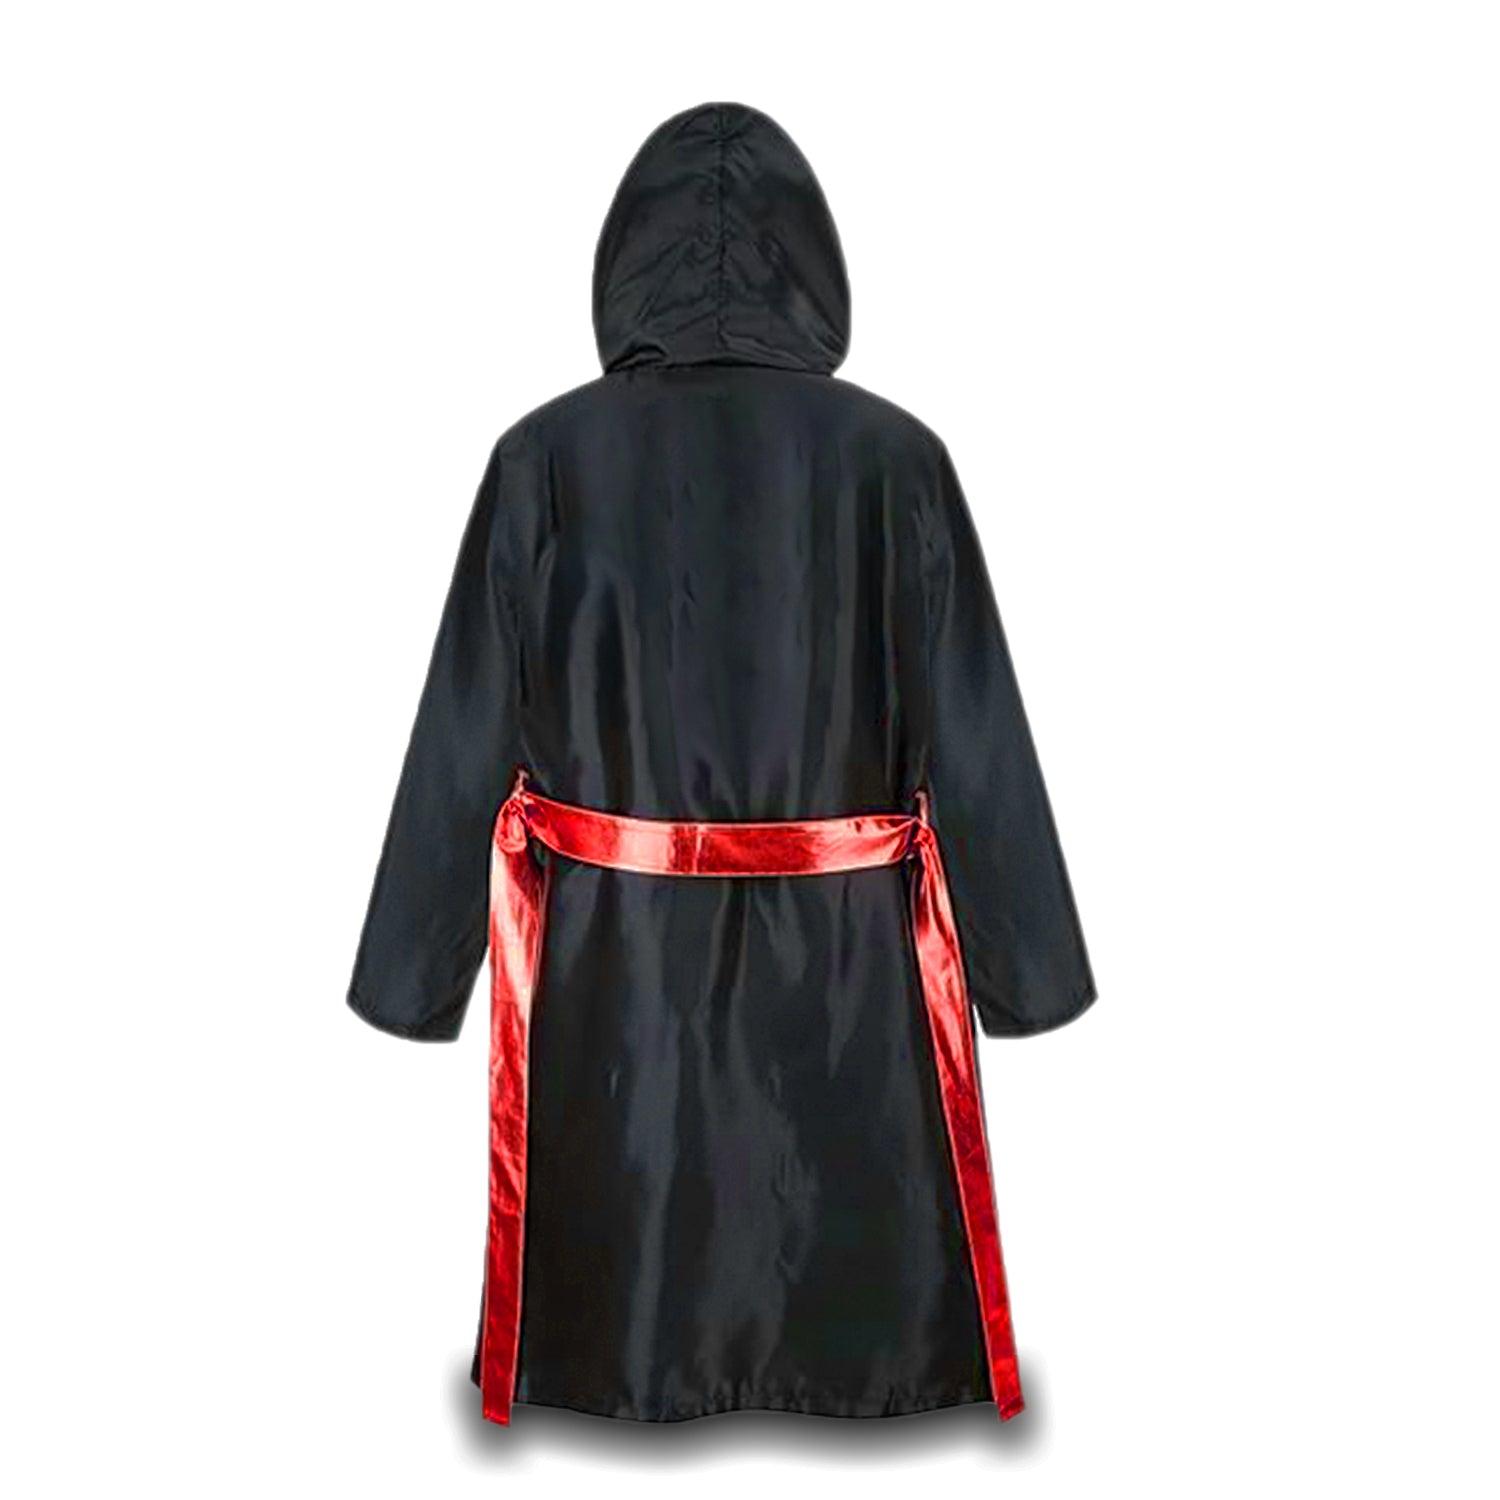 RingMaster Sports Champion Series Boxing Kids Fight Robe Black & Red Gown Image 4